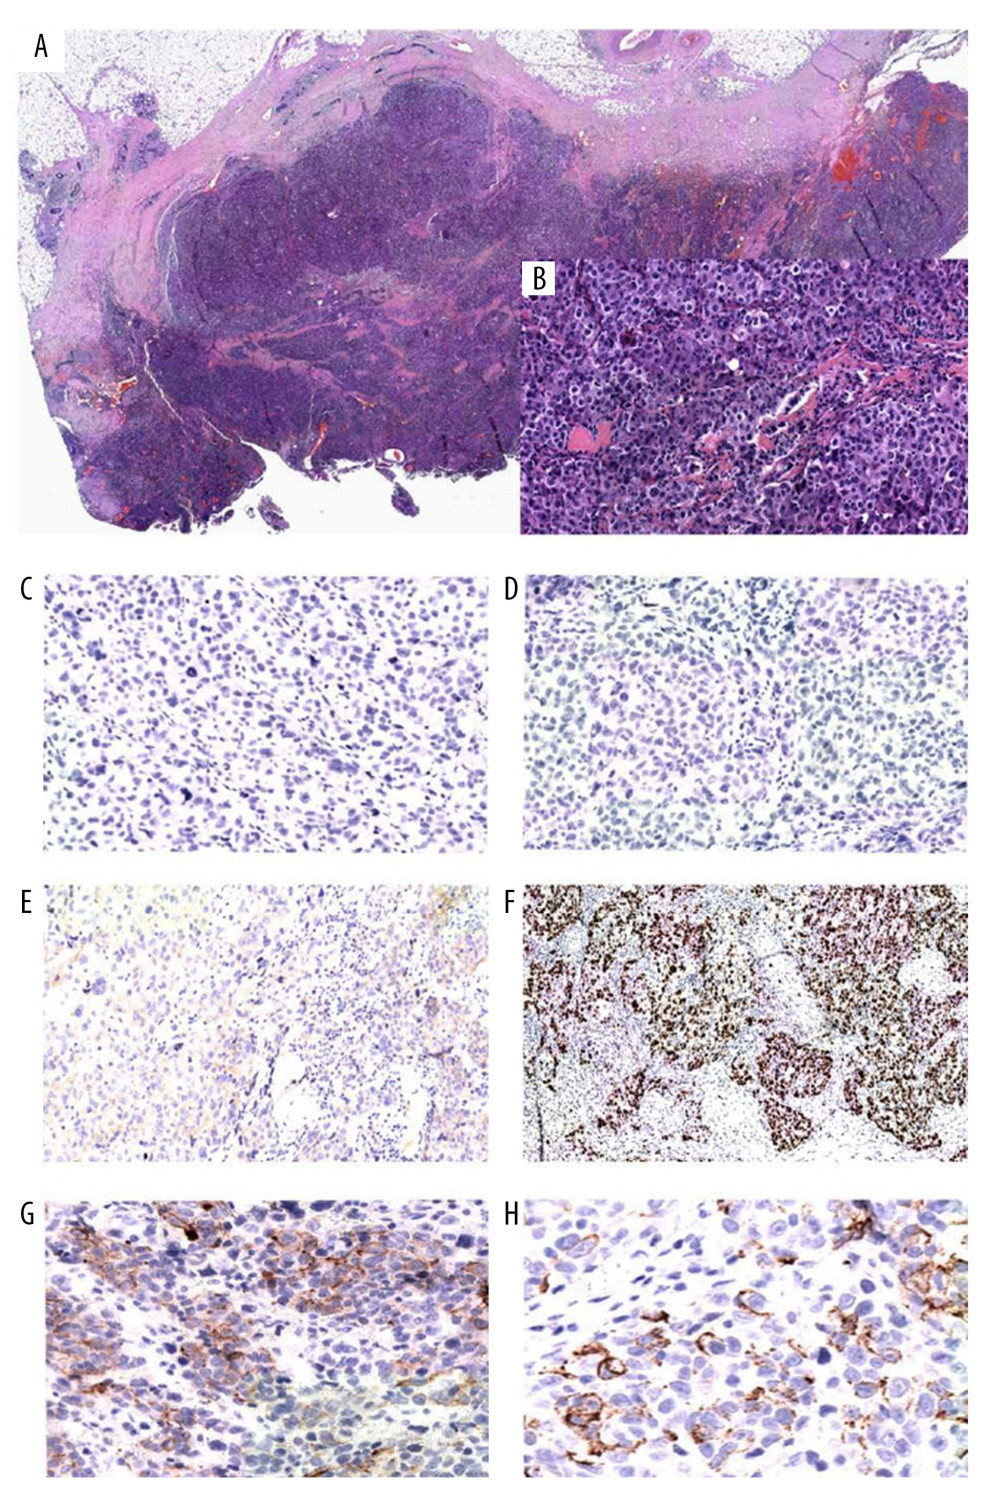 Histopathological features of the described tumor. The histological diagnosis was NST invasive breast cancer with a cystic wall, poorly-differentiated, of grade 3 (G3), as observed by hematoxylin and eosin staining at magnification ×1 (A) and ×20 (B). Immunohistochemical features of ER (C), PR (D), and HER2 (E) at magnification ×20. ER, PR, and HER2 staining results were all negative. The Ki-67 labeling index was 80% (F) at magnification ×20. The result of staining with basal cytokeratins, CK 5/6 (G), and CK14 (H) was focally positive at magnification ×20.